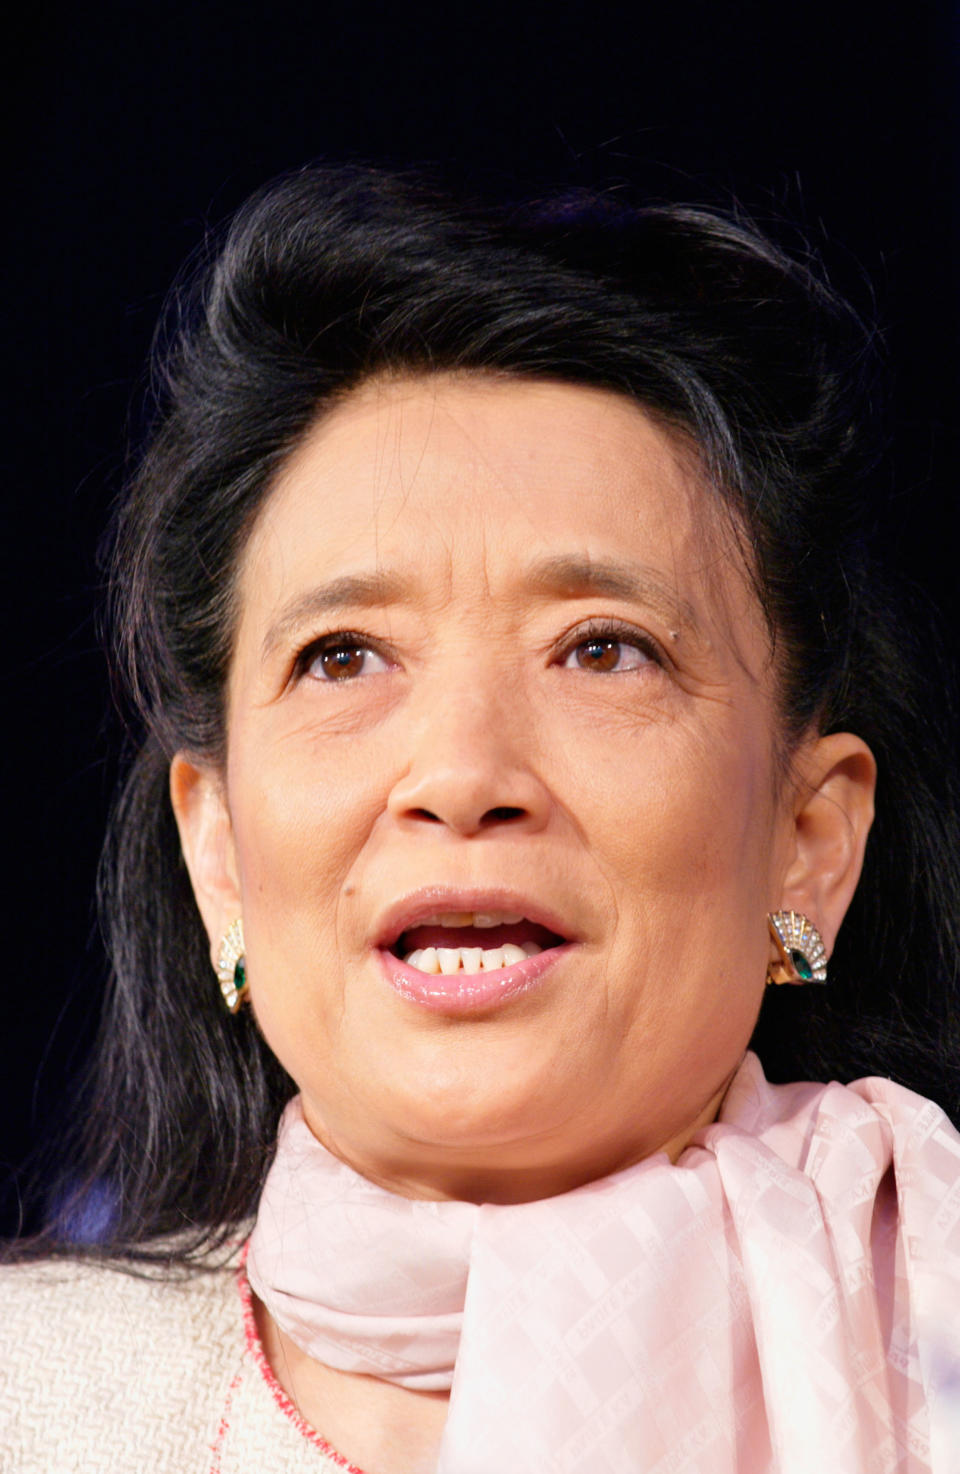 LIVED: 1952- IMMIGRATED: 1978 from China OCCUPATION: Writer FAMOUS FOR: Selling over 10 million copies of fer family's autobiography, 'Wild Swans'